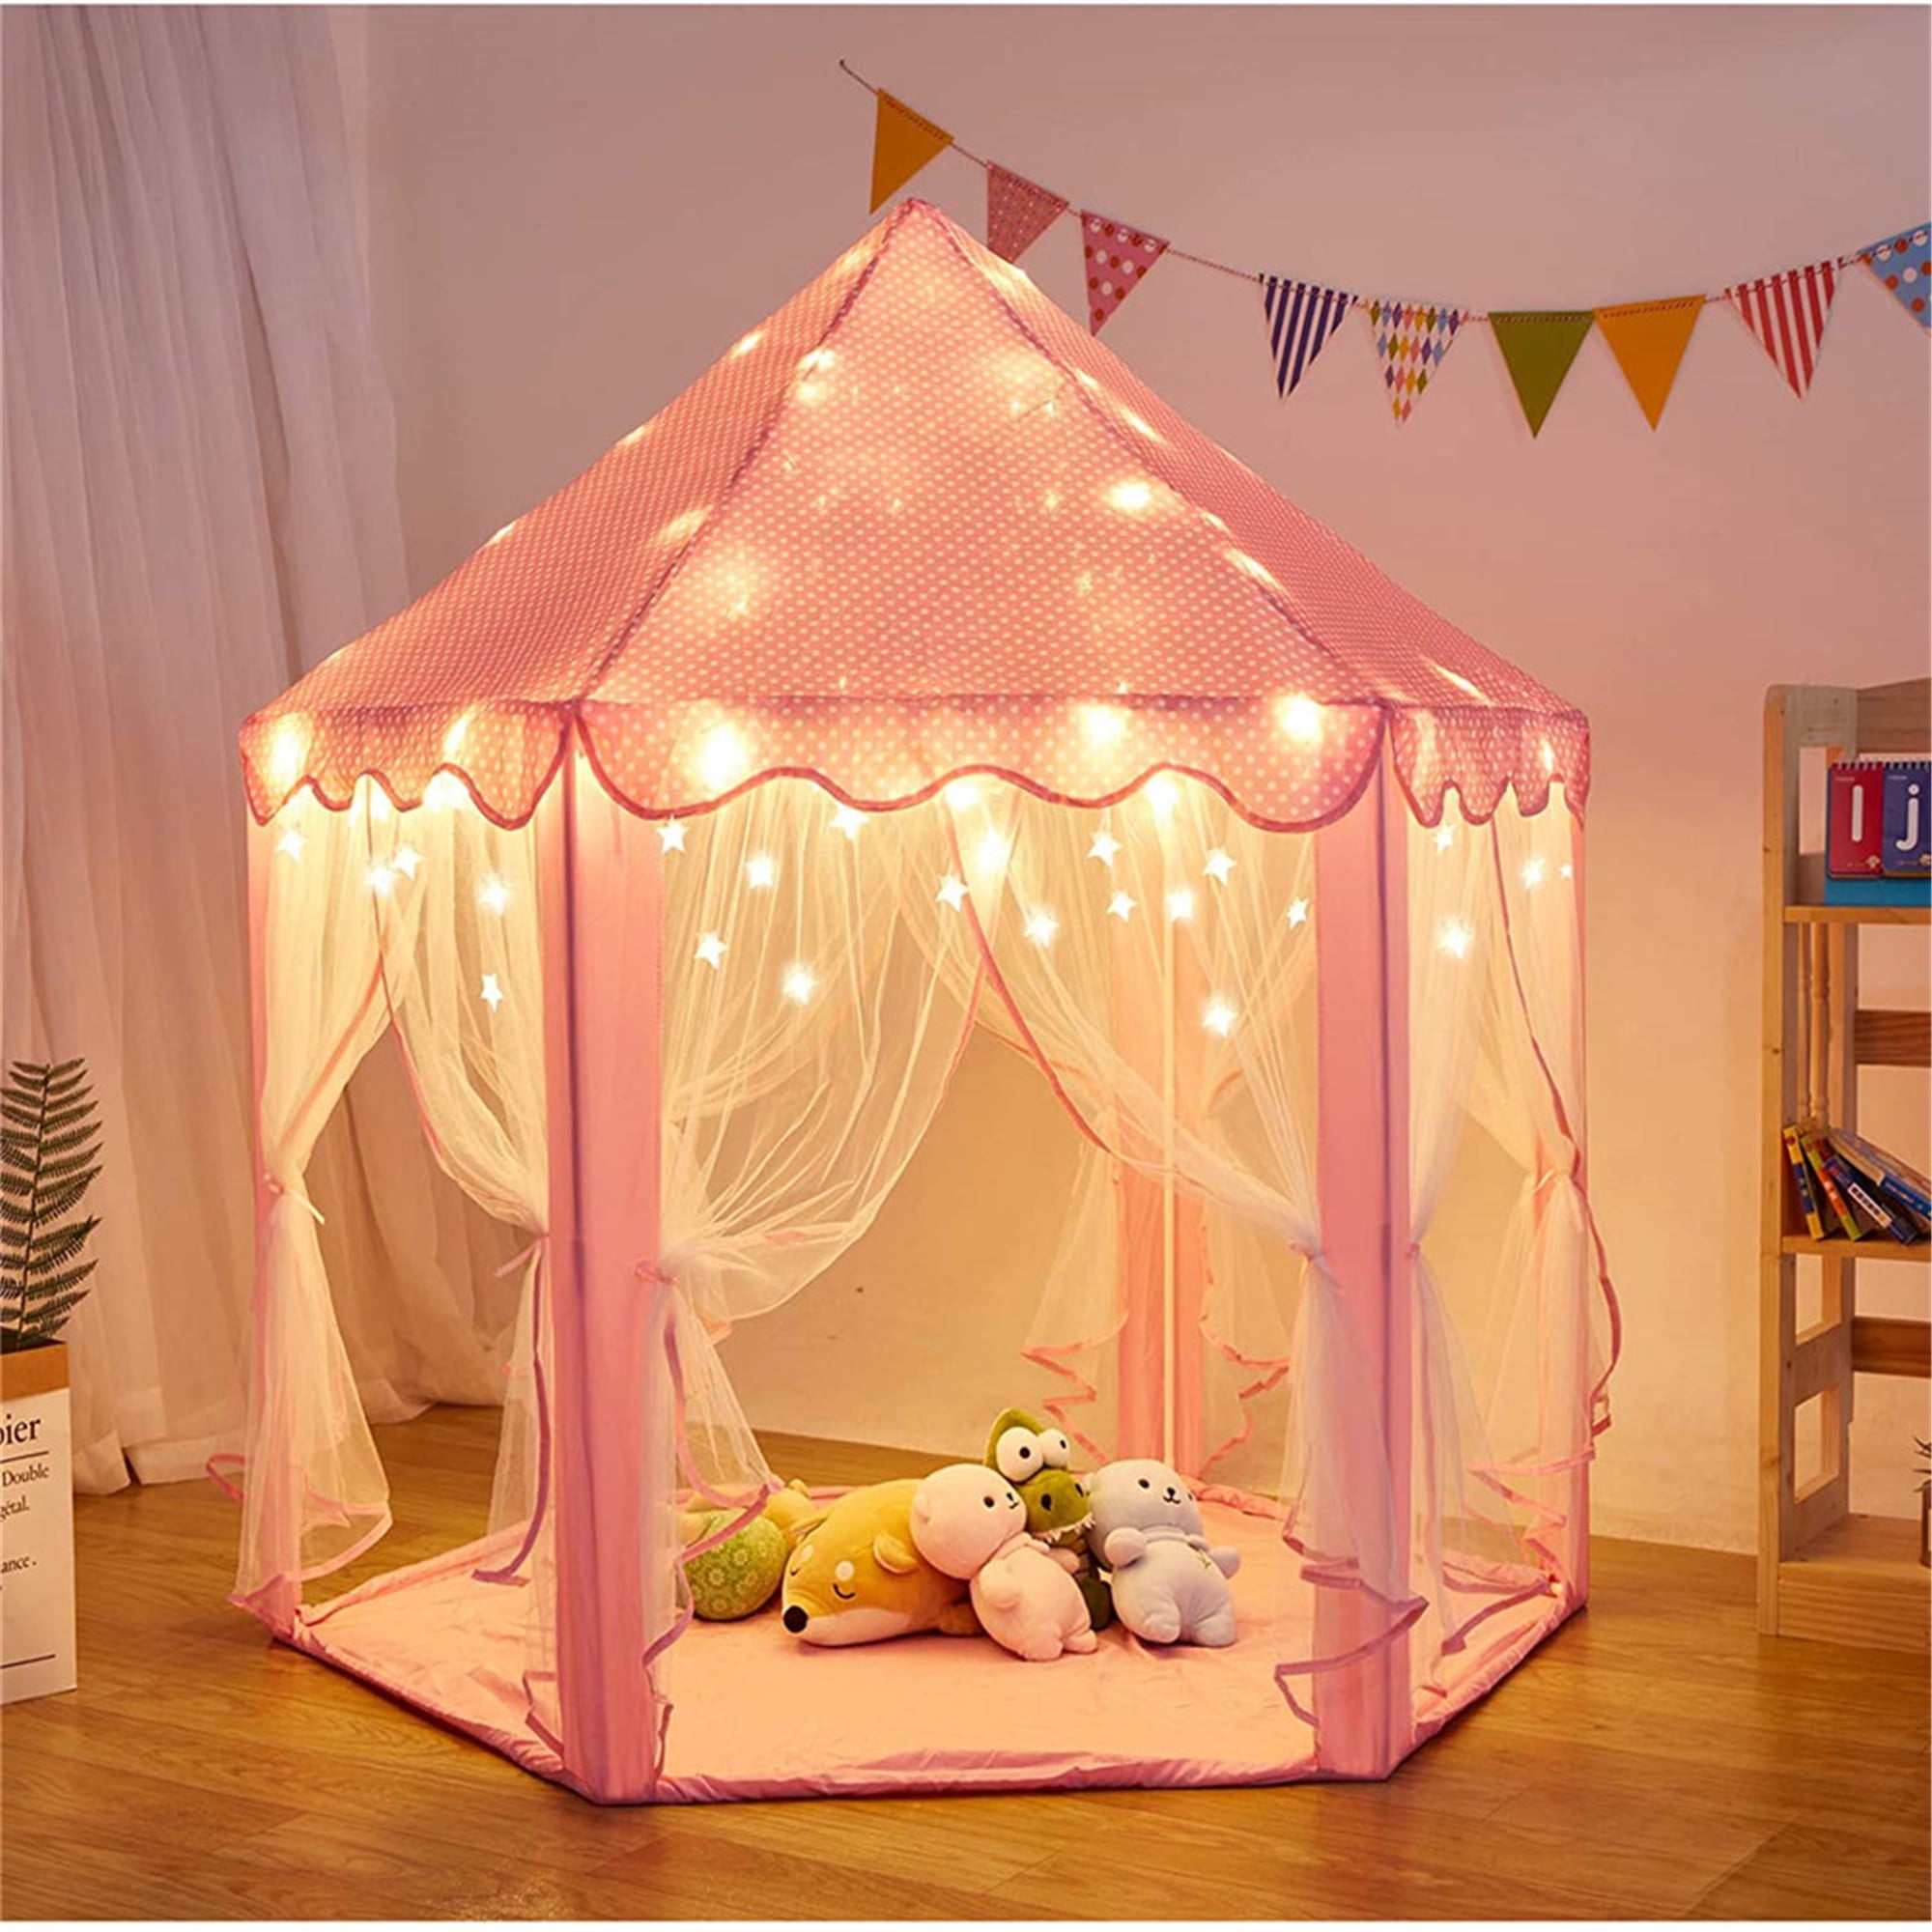 Princess Play Tent Castle Play House String Light Gifts Tents Toy f/ Kids Girl 